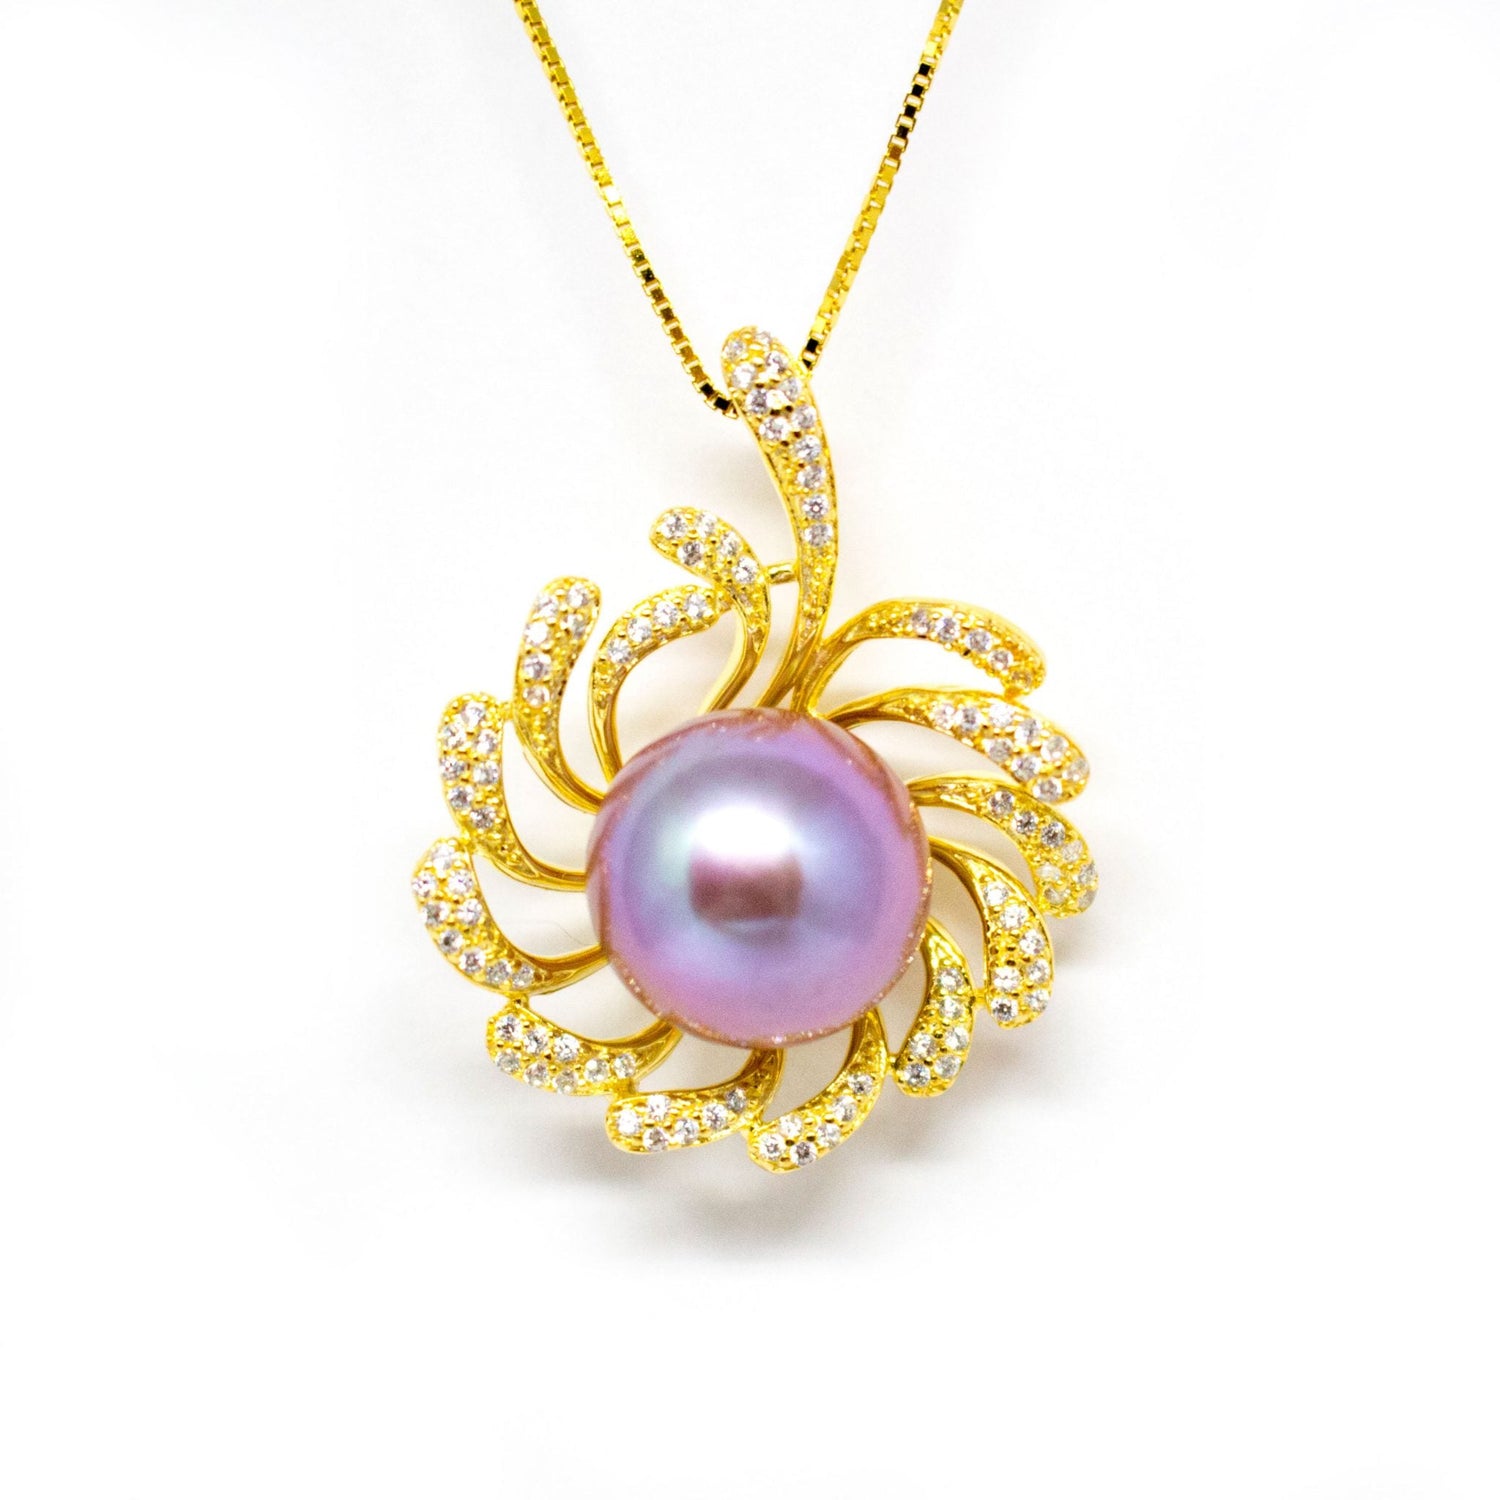 Flaming Heart Edison Pearl Necklace - Timeless Pearl